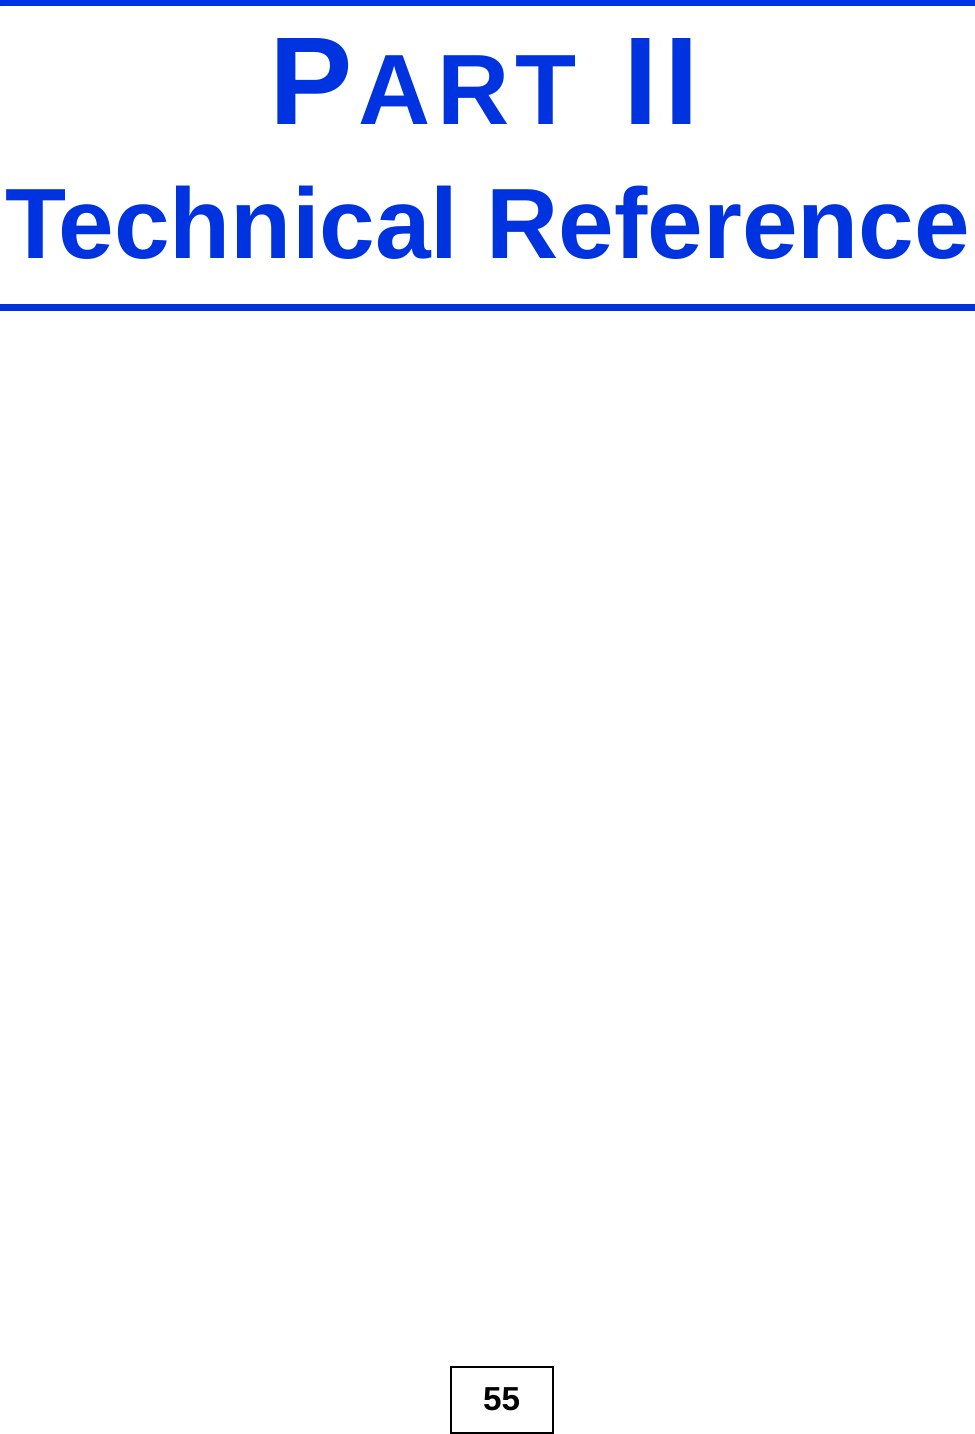 55PART IITechnical Reference